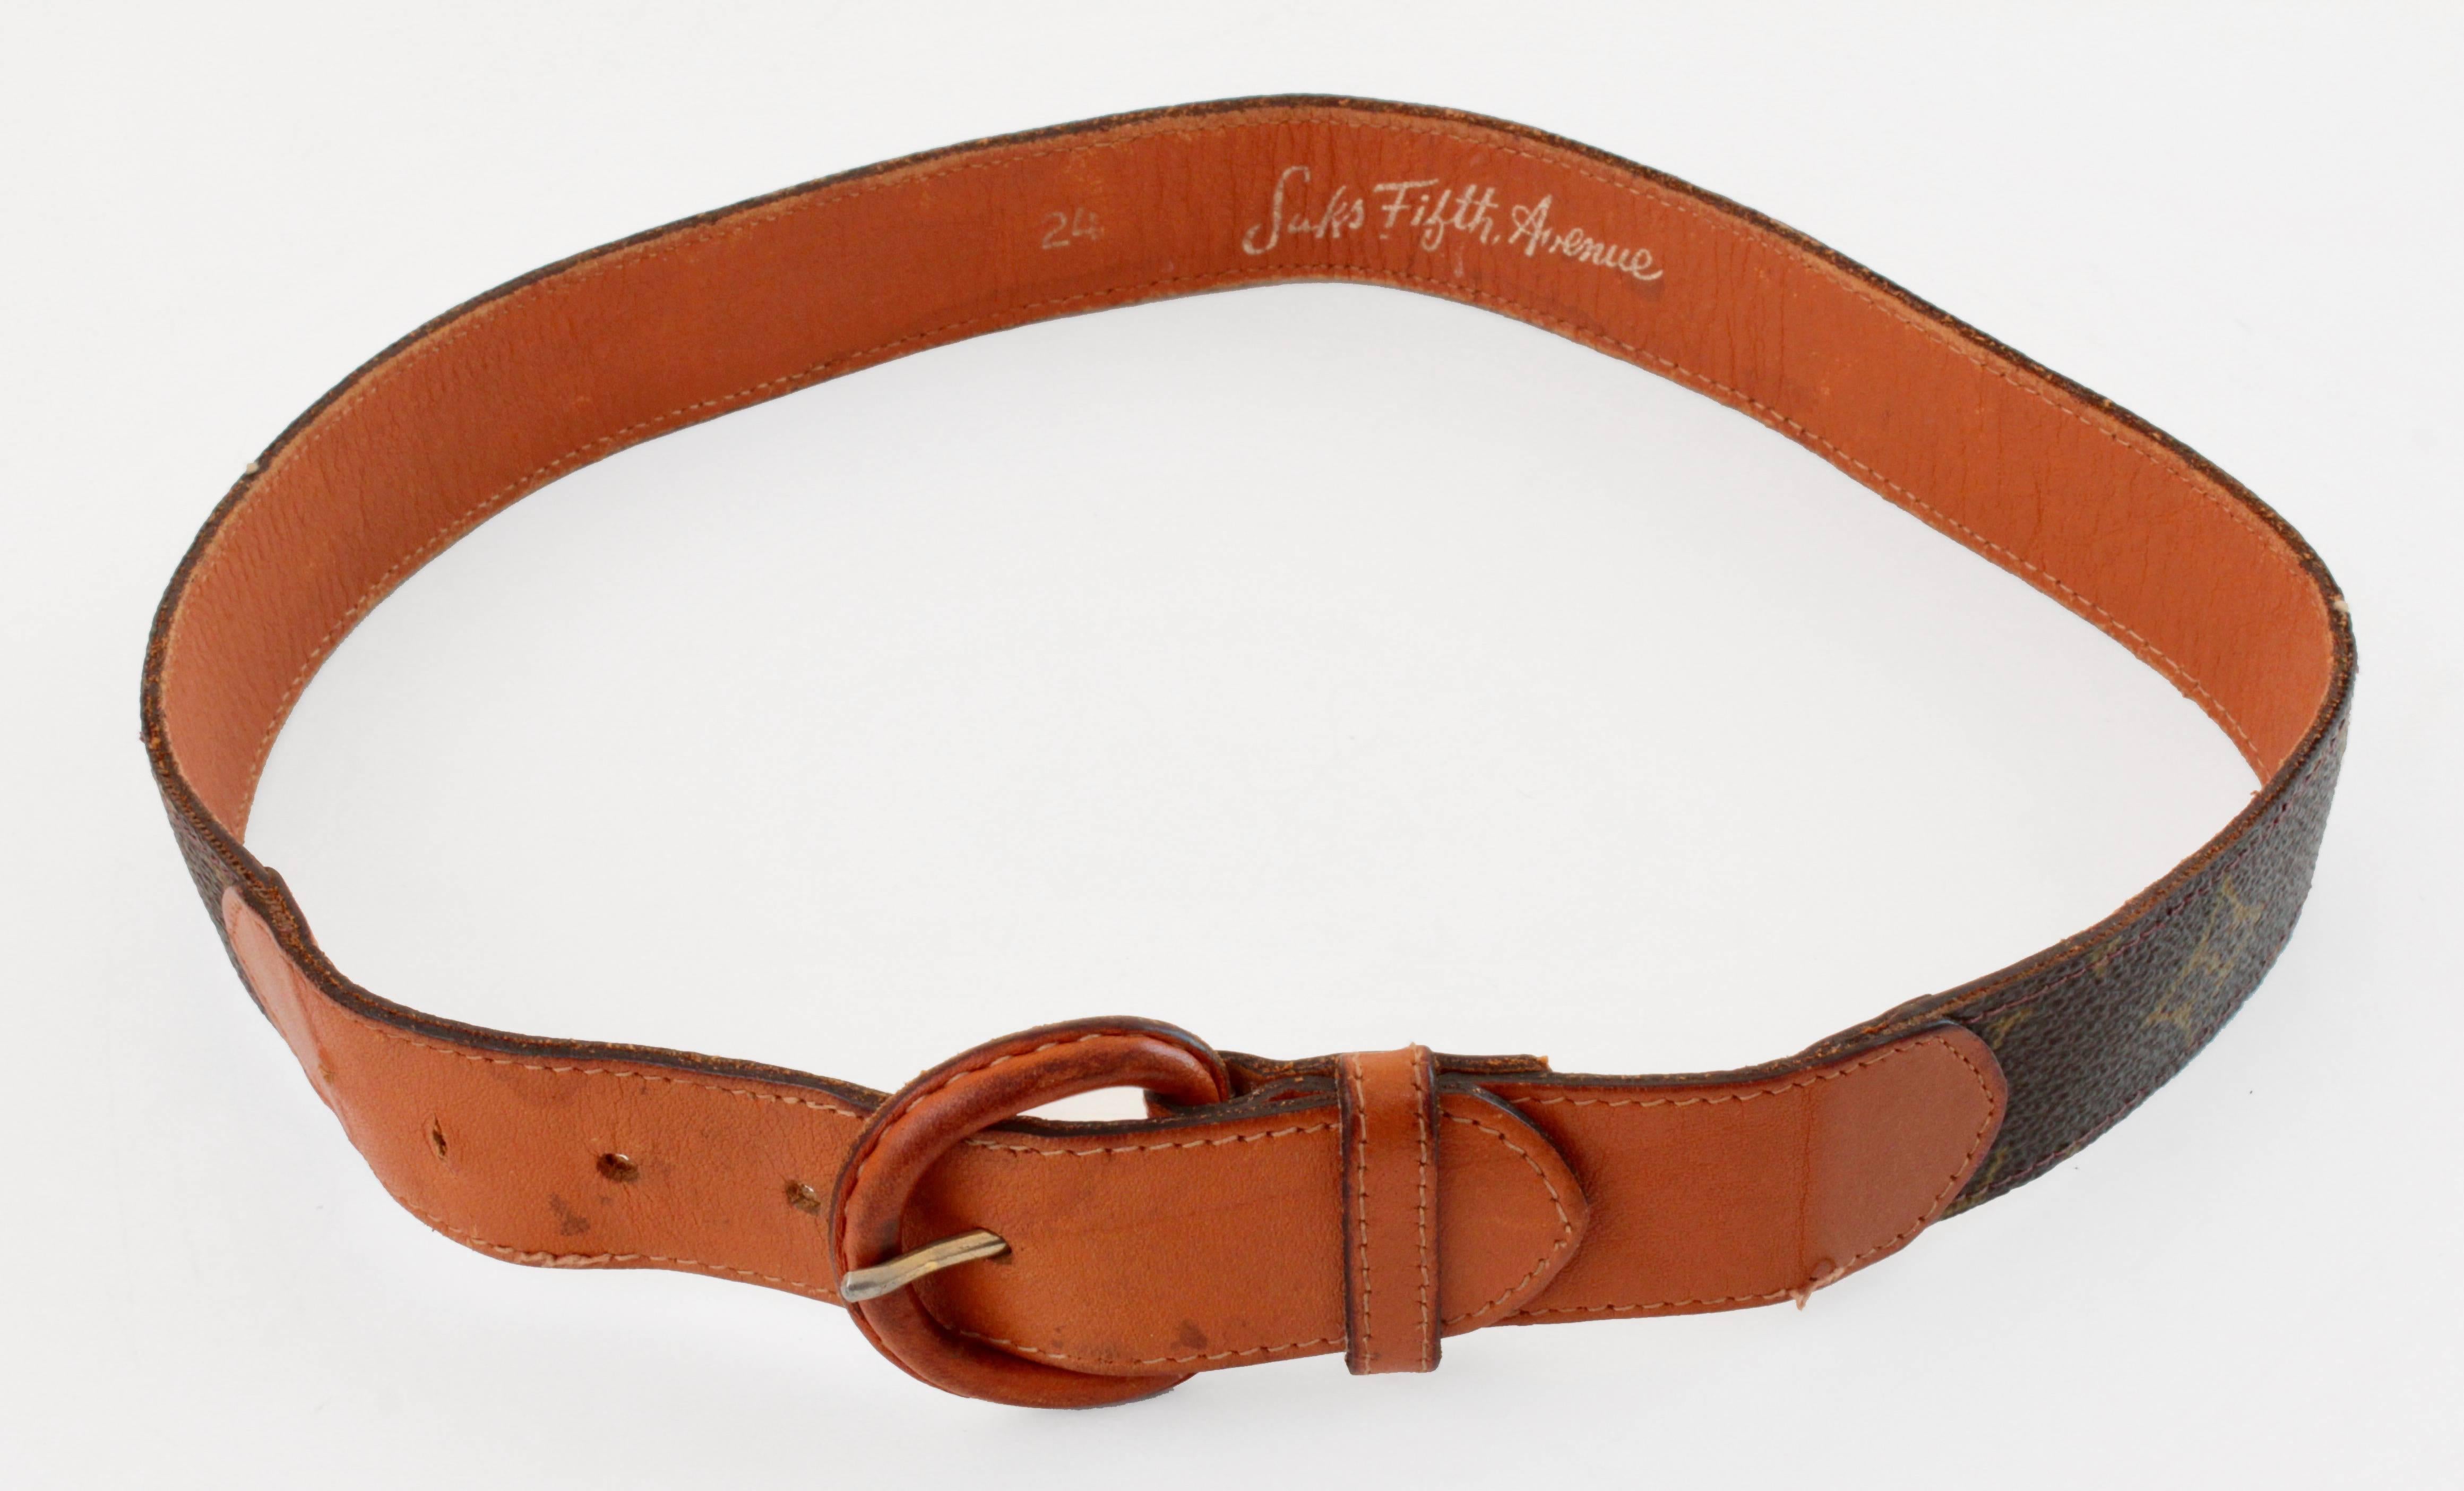 This vintage belt was made by Louis Vuitton for Saks Fifth Avenue, most likely in the early 70s.  Louis Vuitton partnered with high end retailers such as Saks during this period, before the house had a boutique presence in the USA.  Made from their